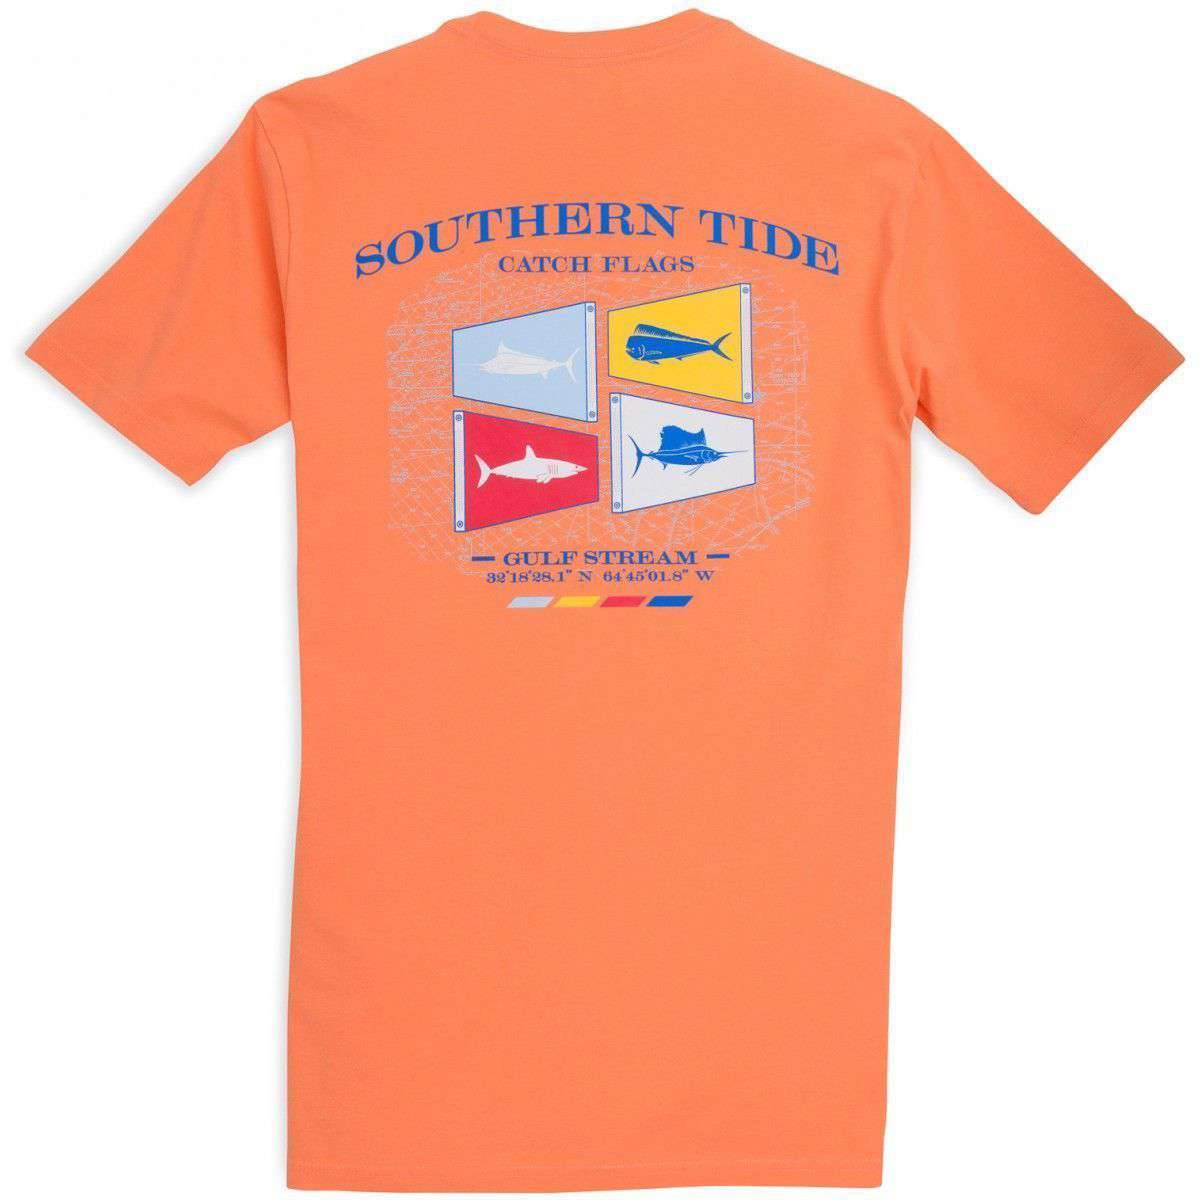 Catch Flags II Tee-Shirt in Caribbean Estate Orange by Southern Tide - Country Club Prep